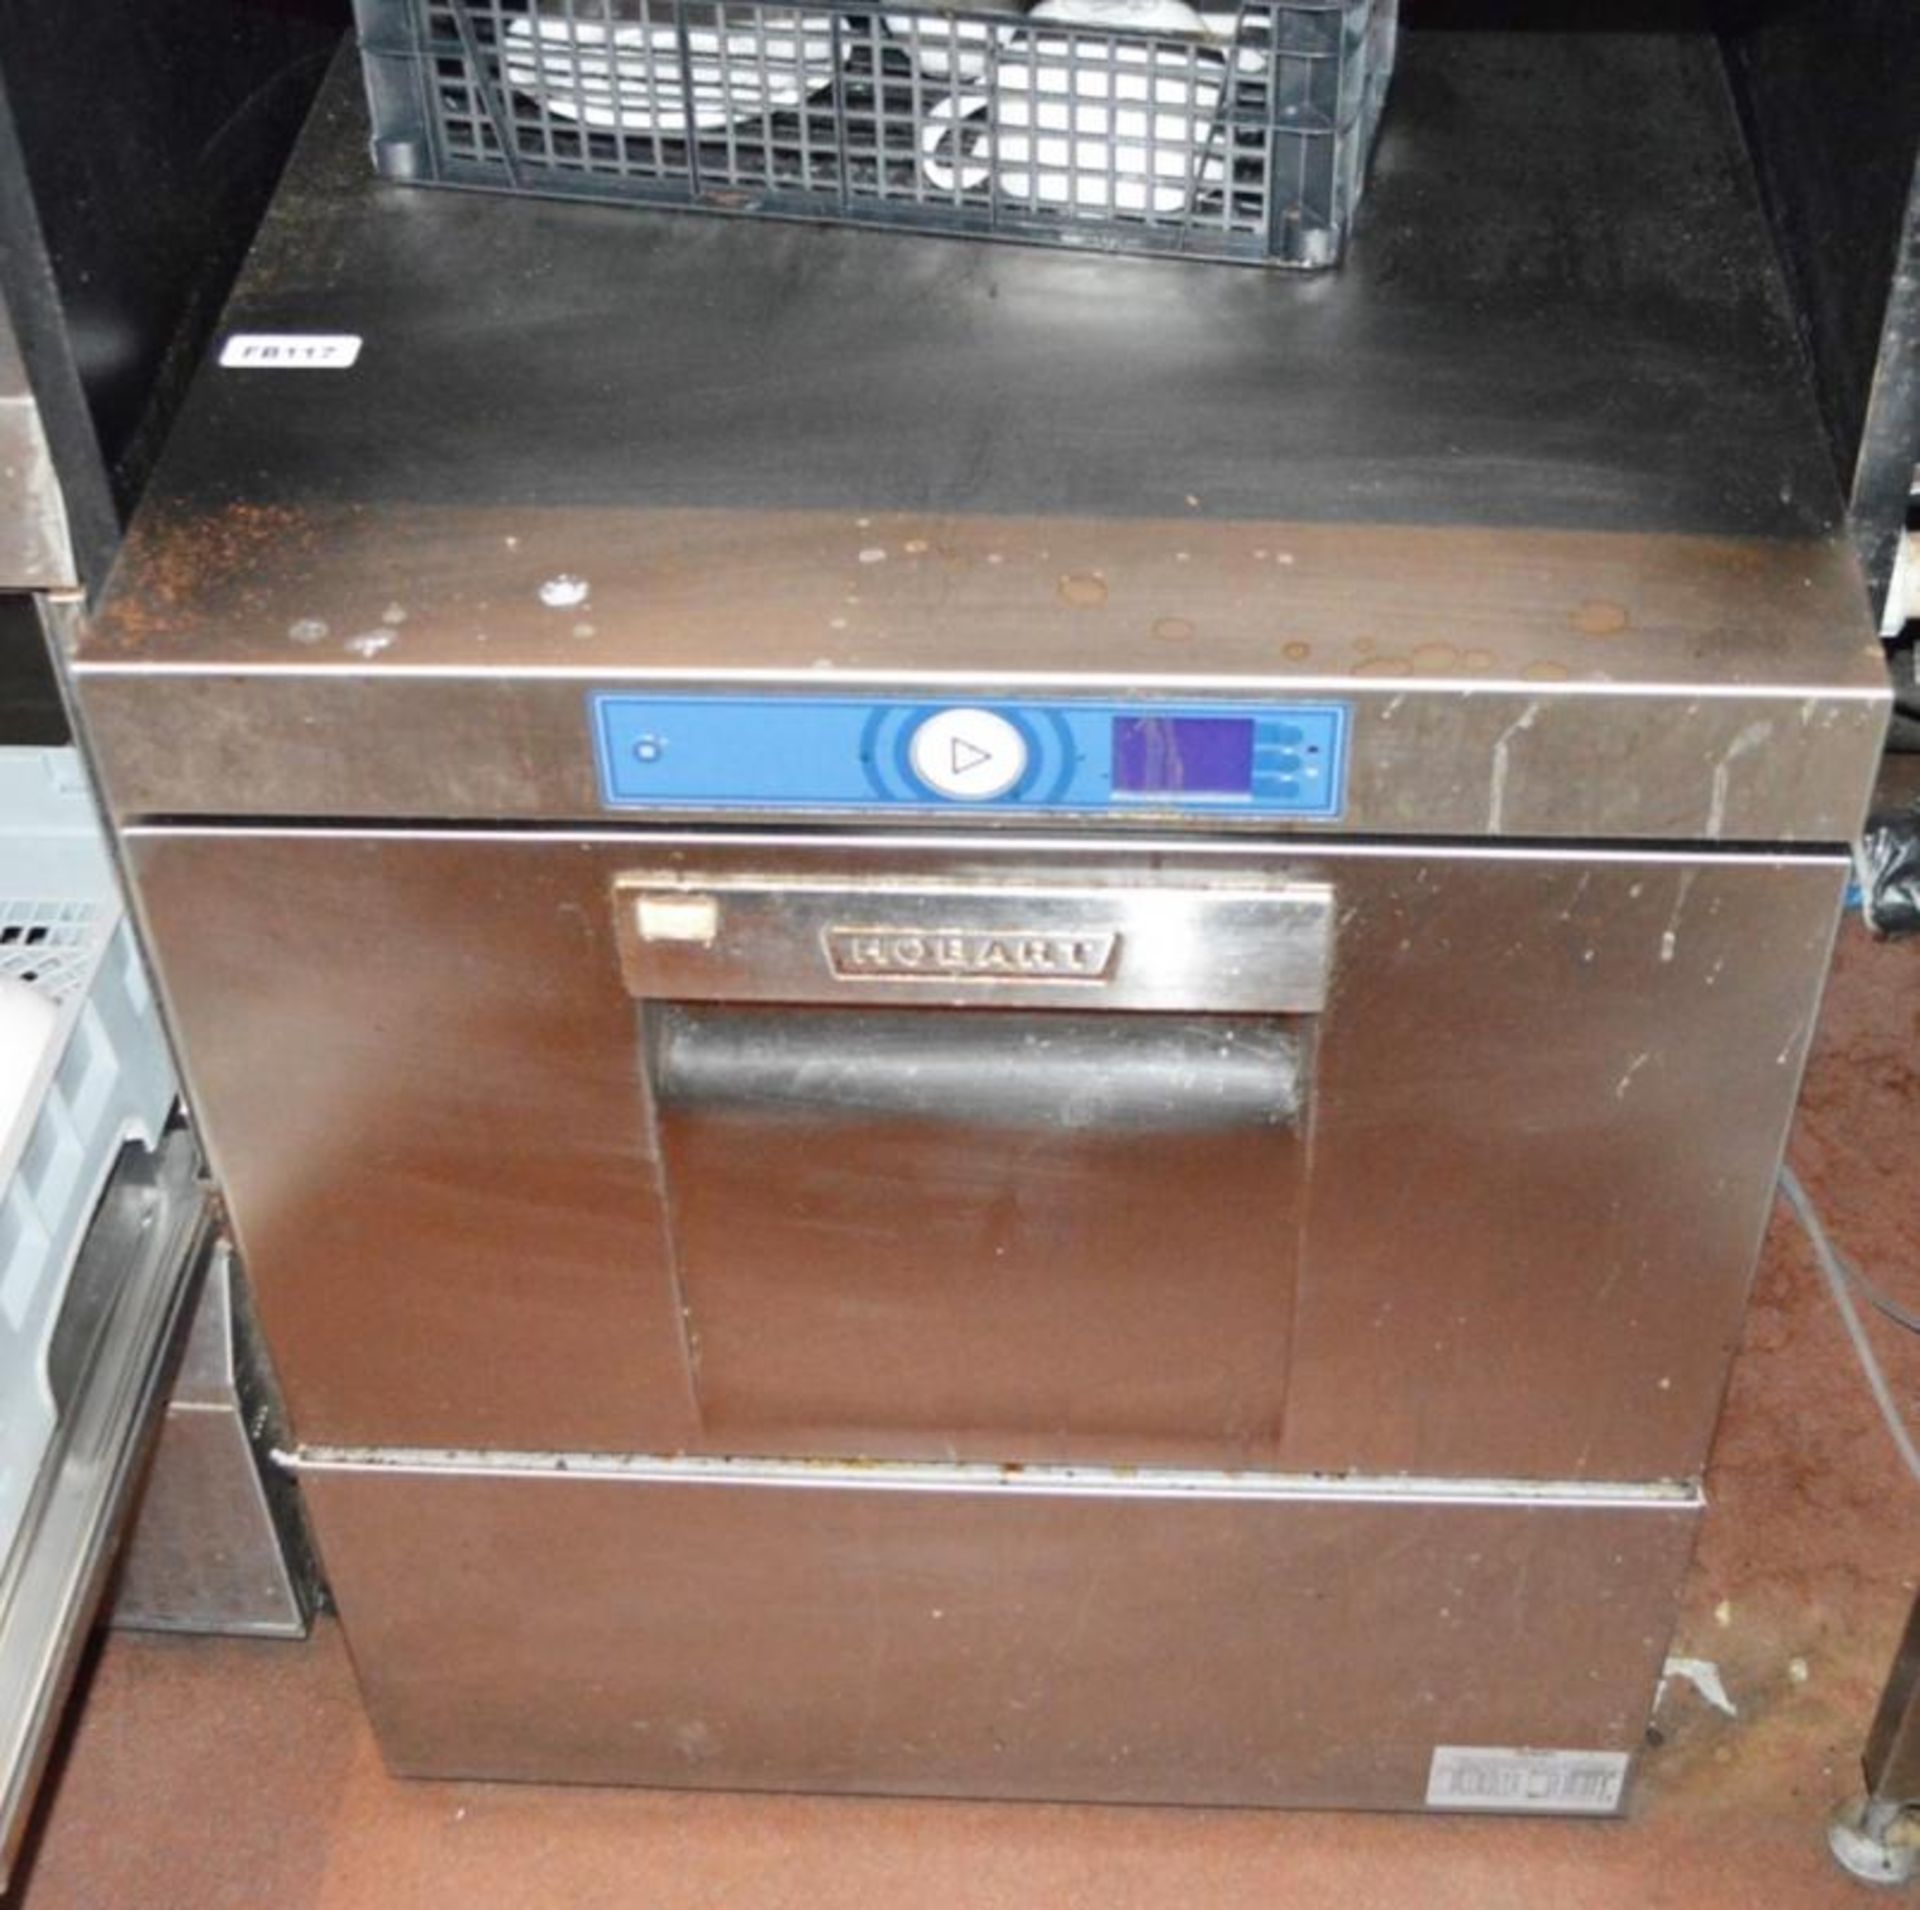 1 x Hobart Stainless Steel Undercounter Glass Washer - Model GXCS-11A - 2018 Model - Ref FB117 - CL3